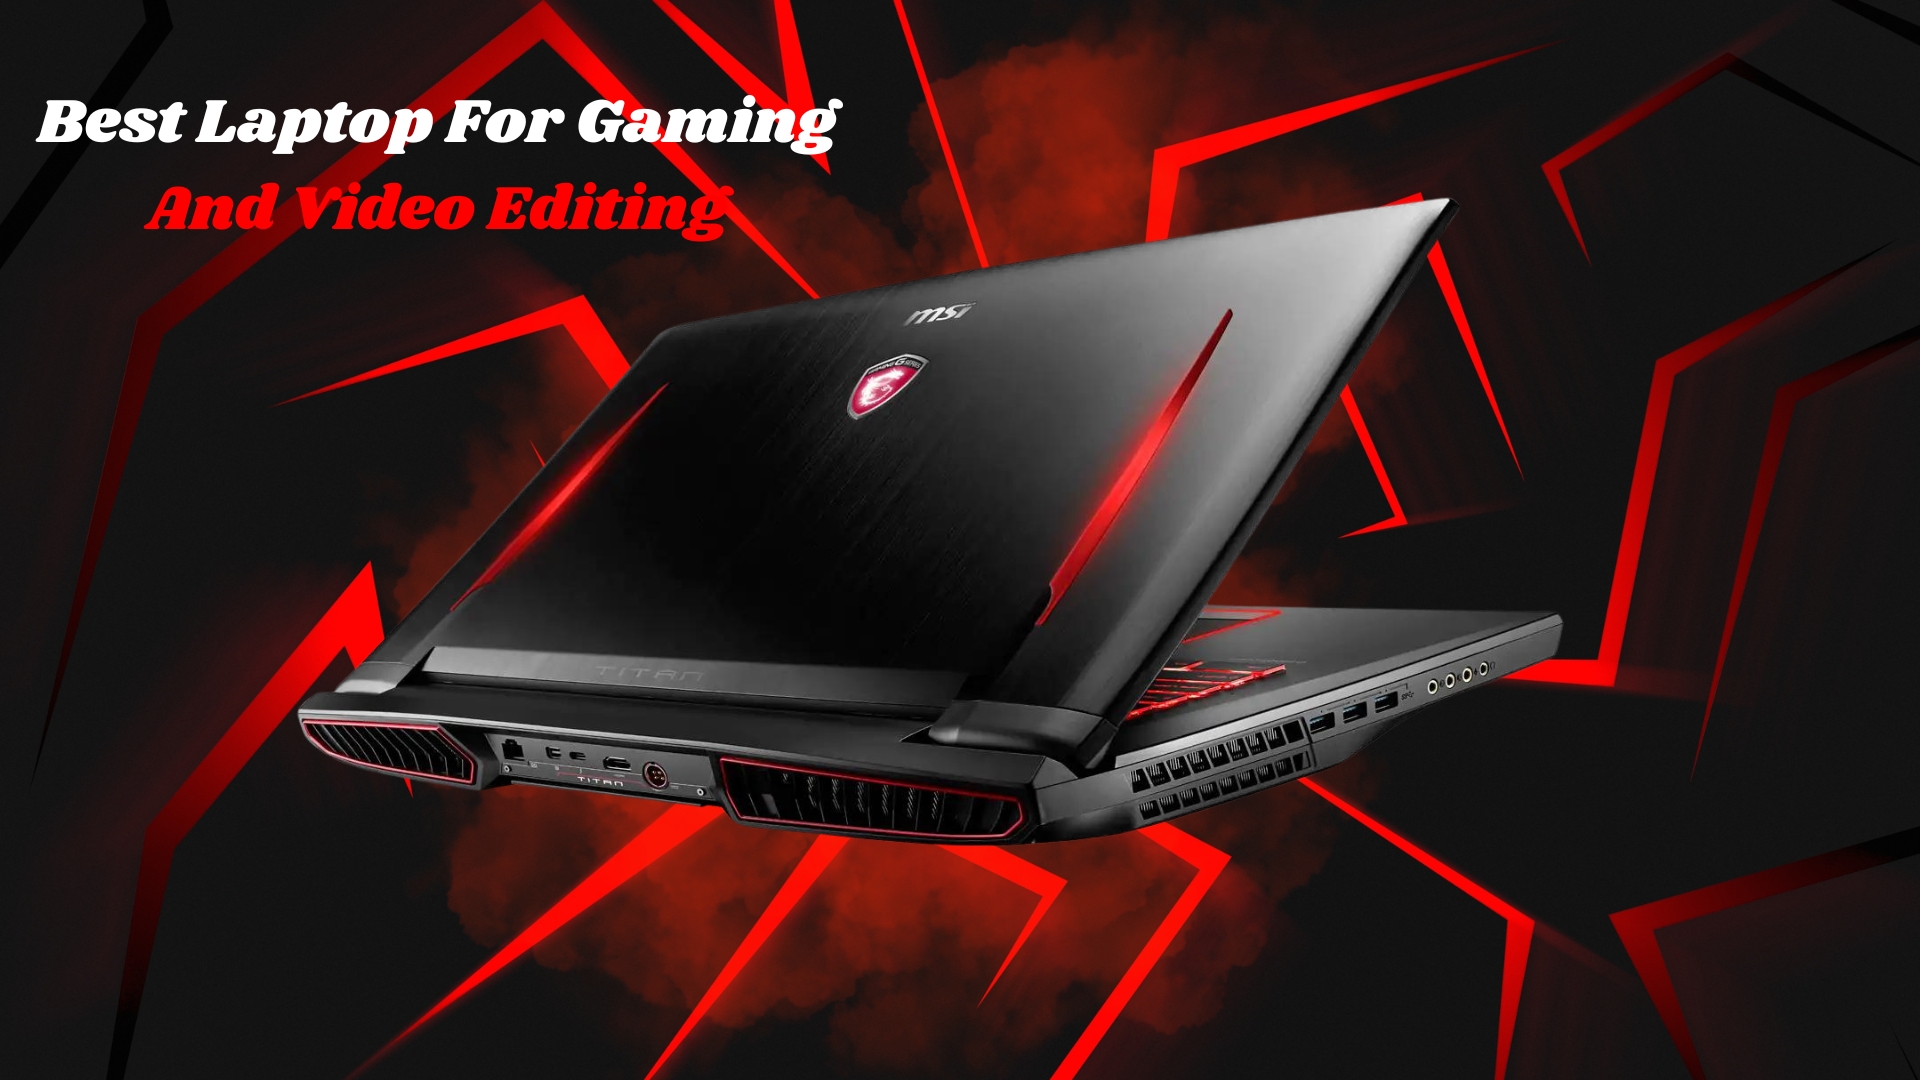 Top Gaming Laptops for Video Editors: Conquer Games & Create Content